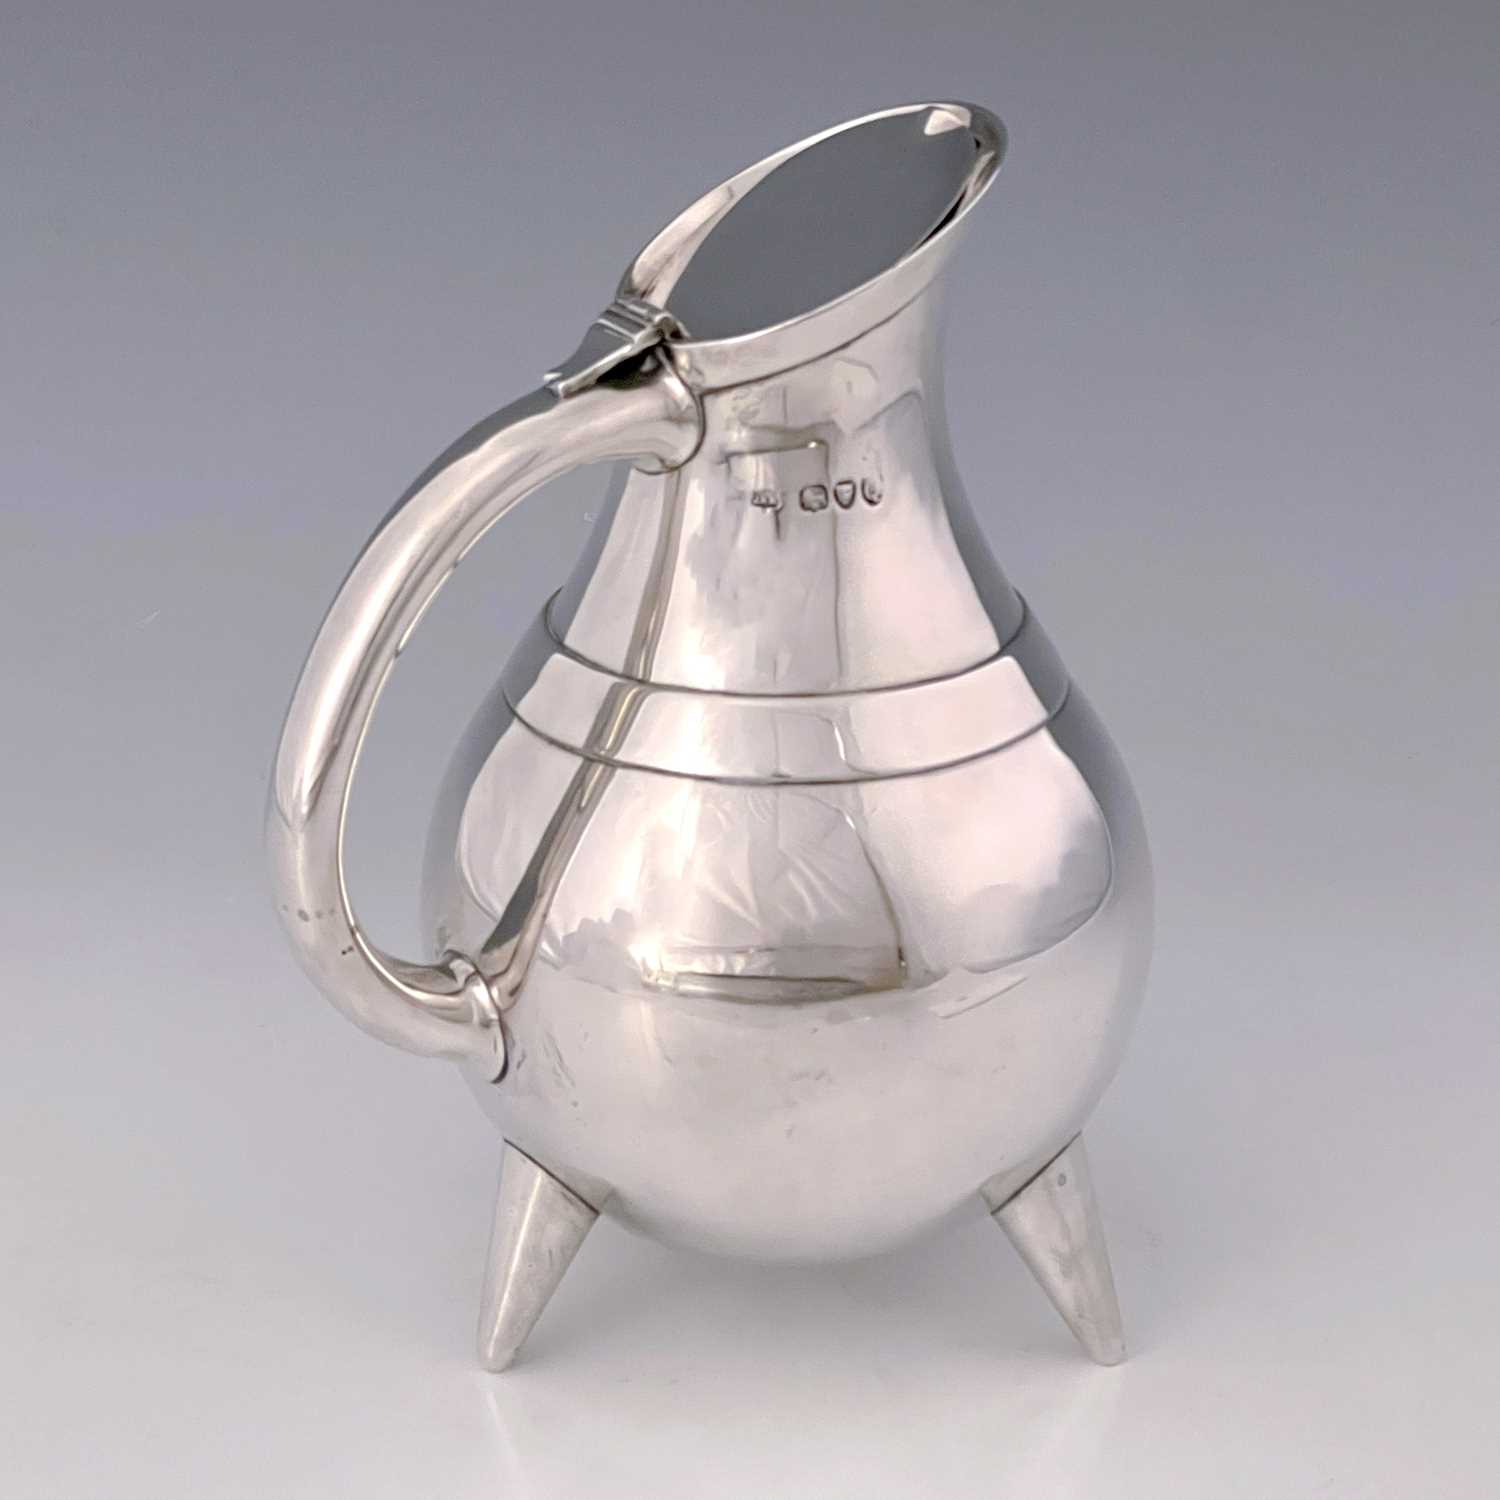 Christopher Dresser (attributed), an Aesthetic Movement silver claret jug, Mappin and Webb, London - Image 3 of 7